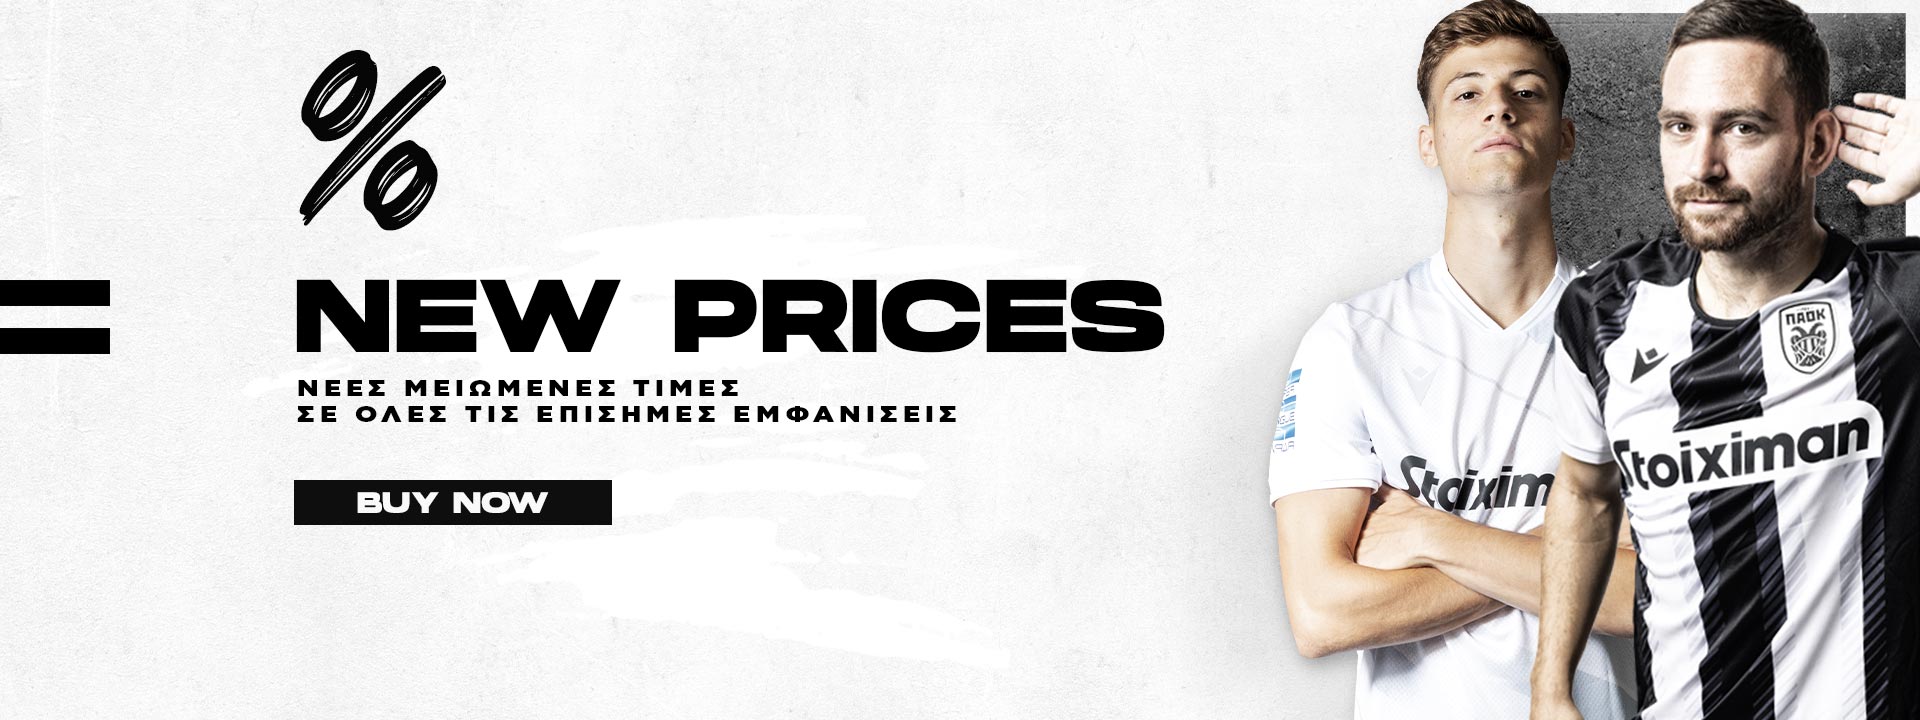 new prices jersey 